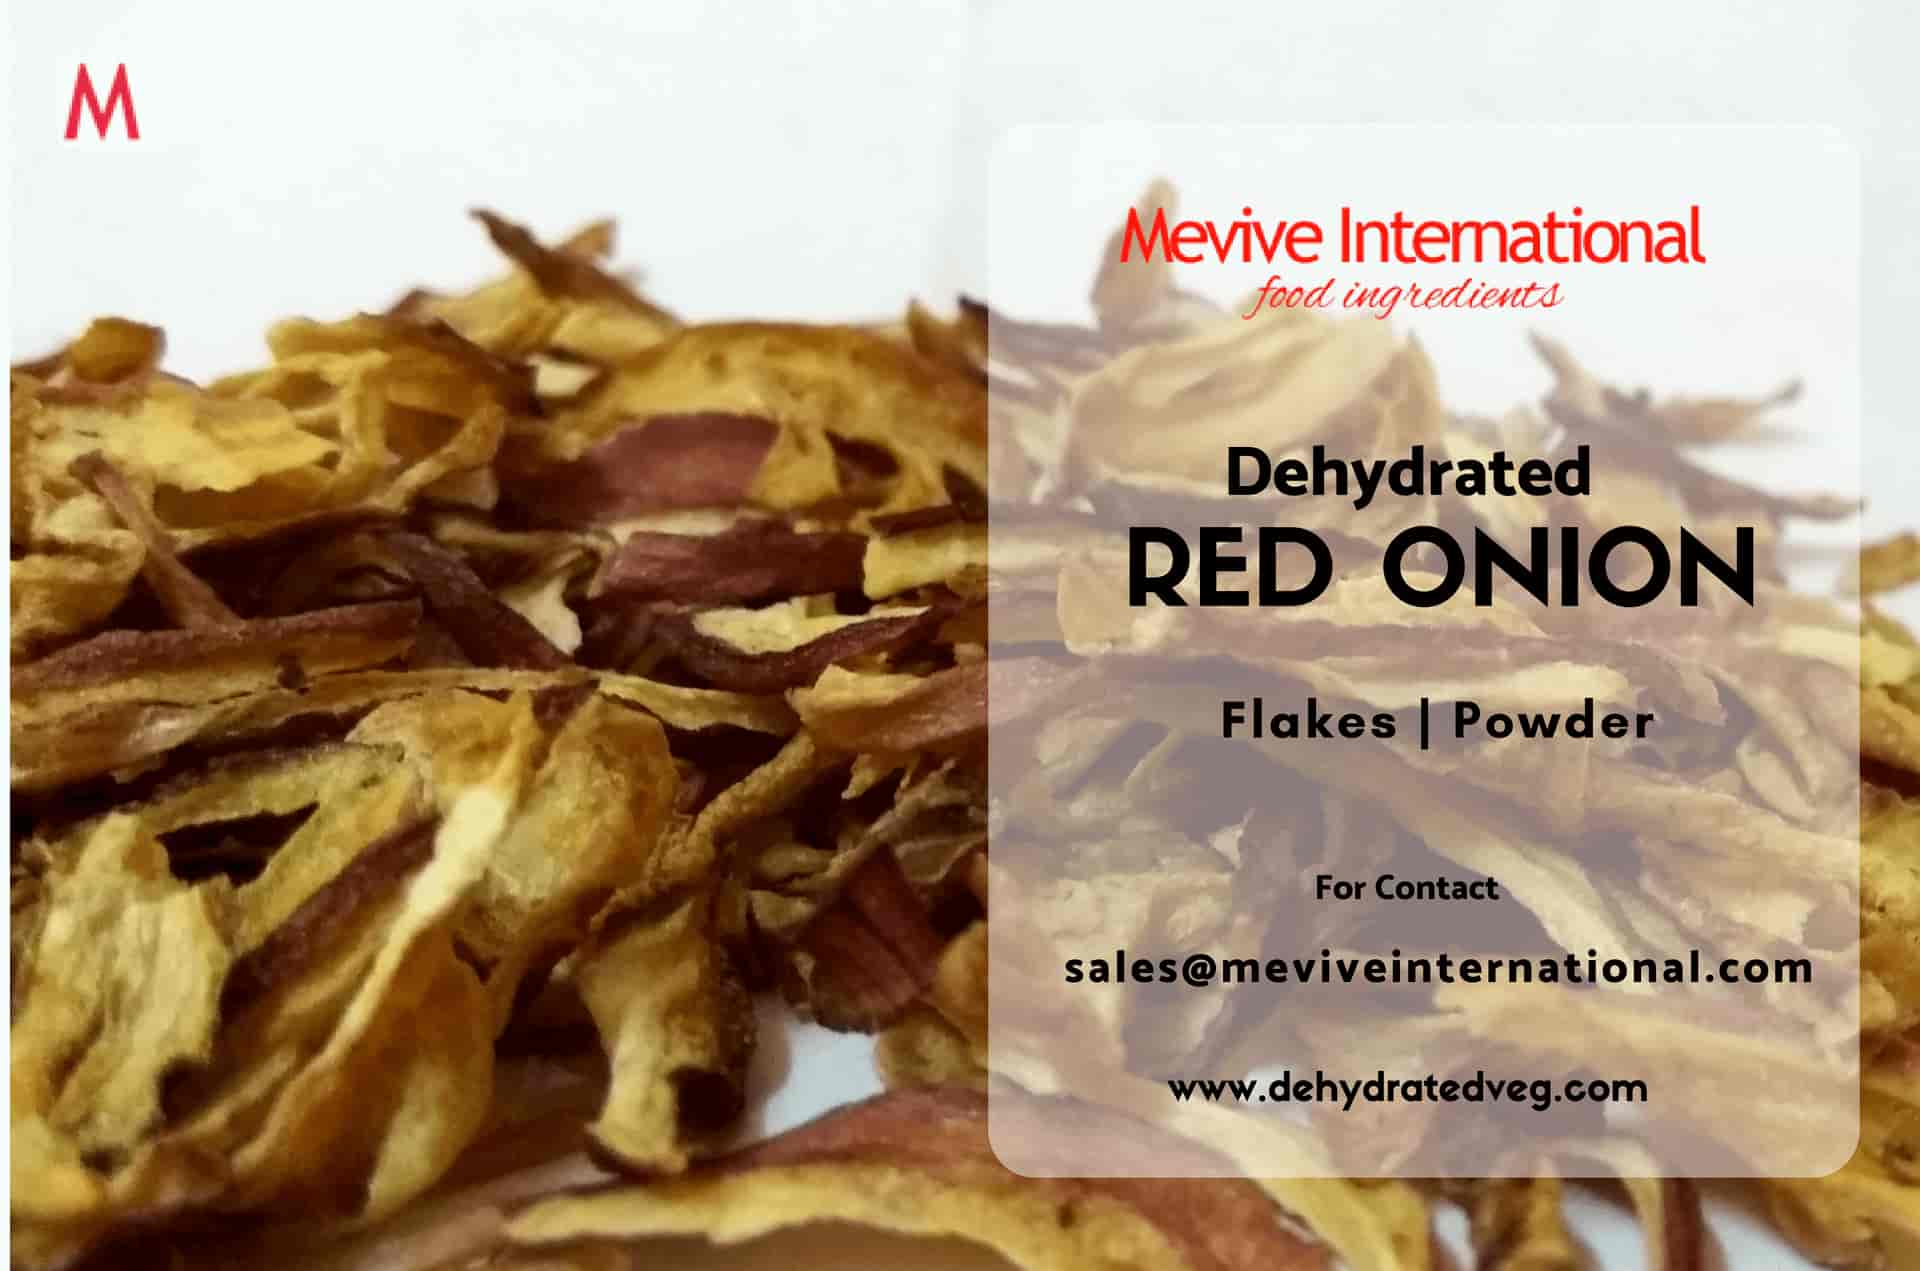 dehydrated red onion flakes supplier in india 